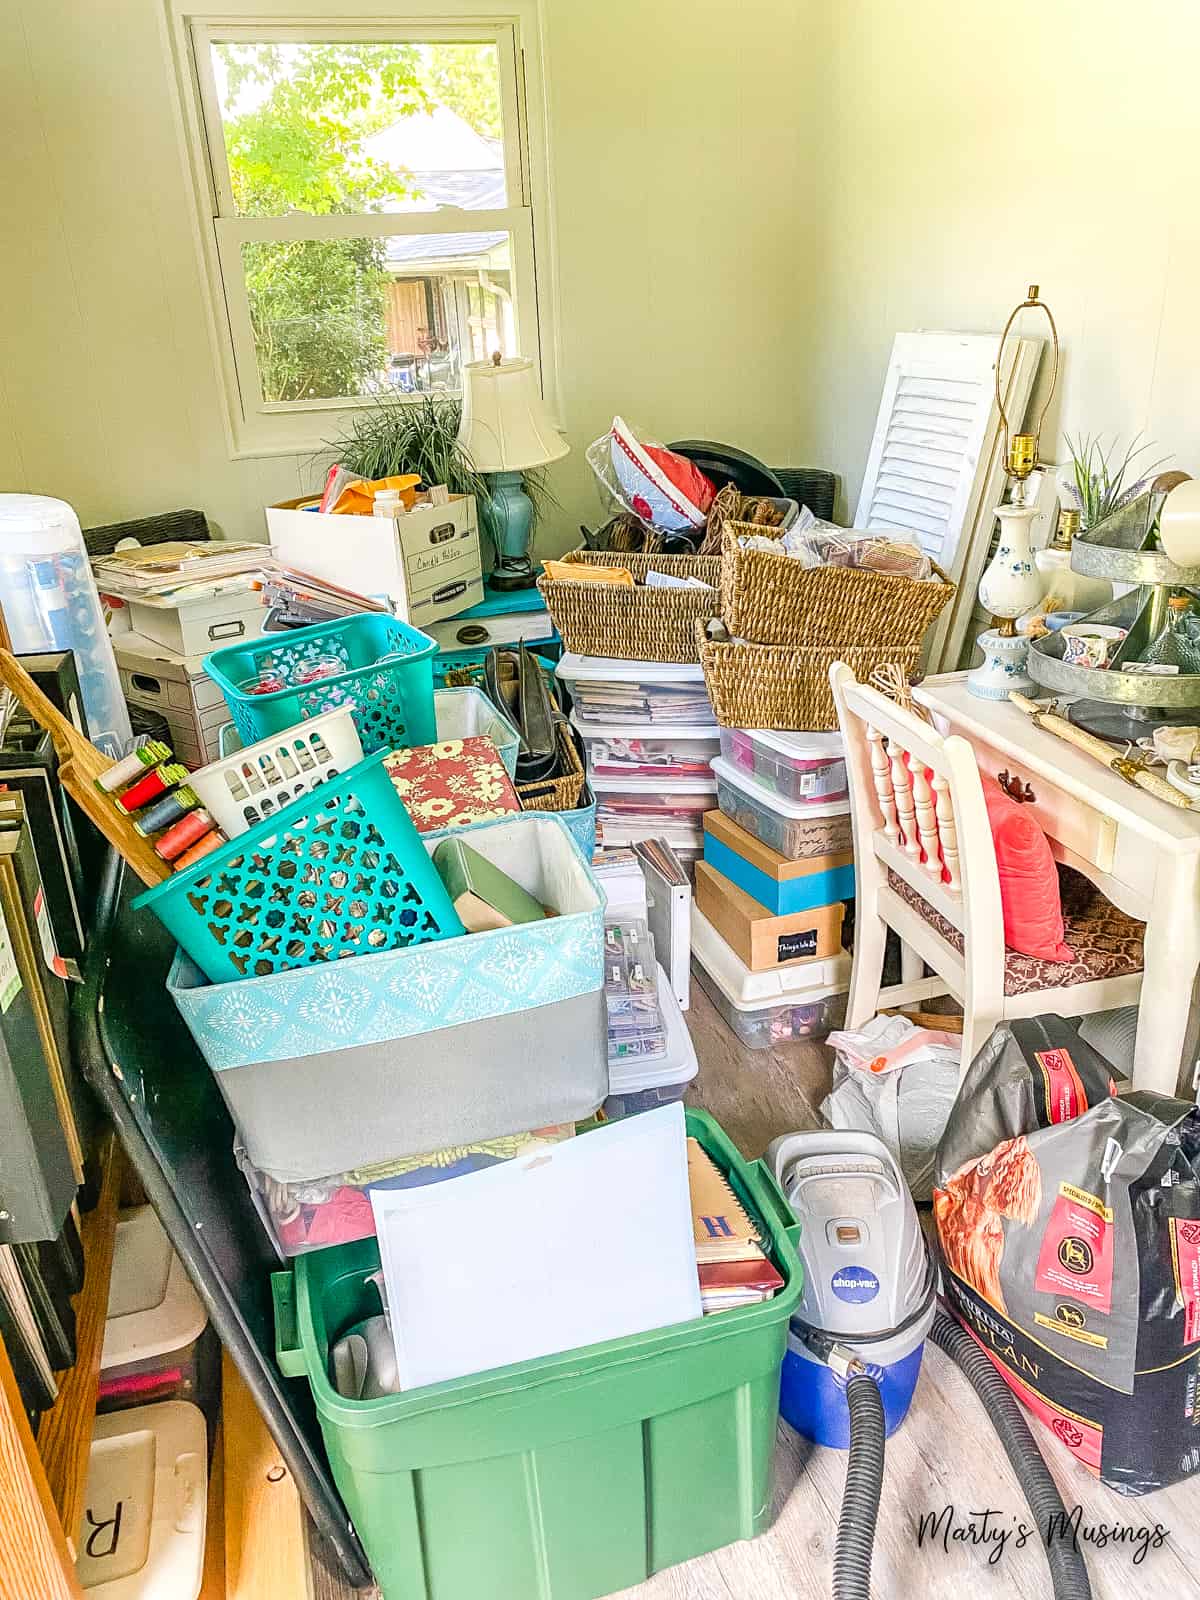 Quickly Declutter and Downsize Your Home